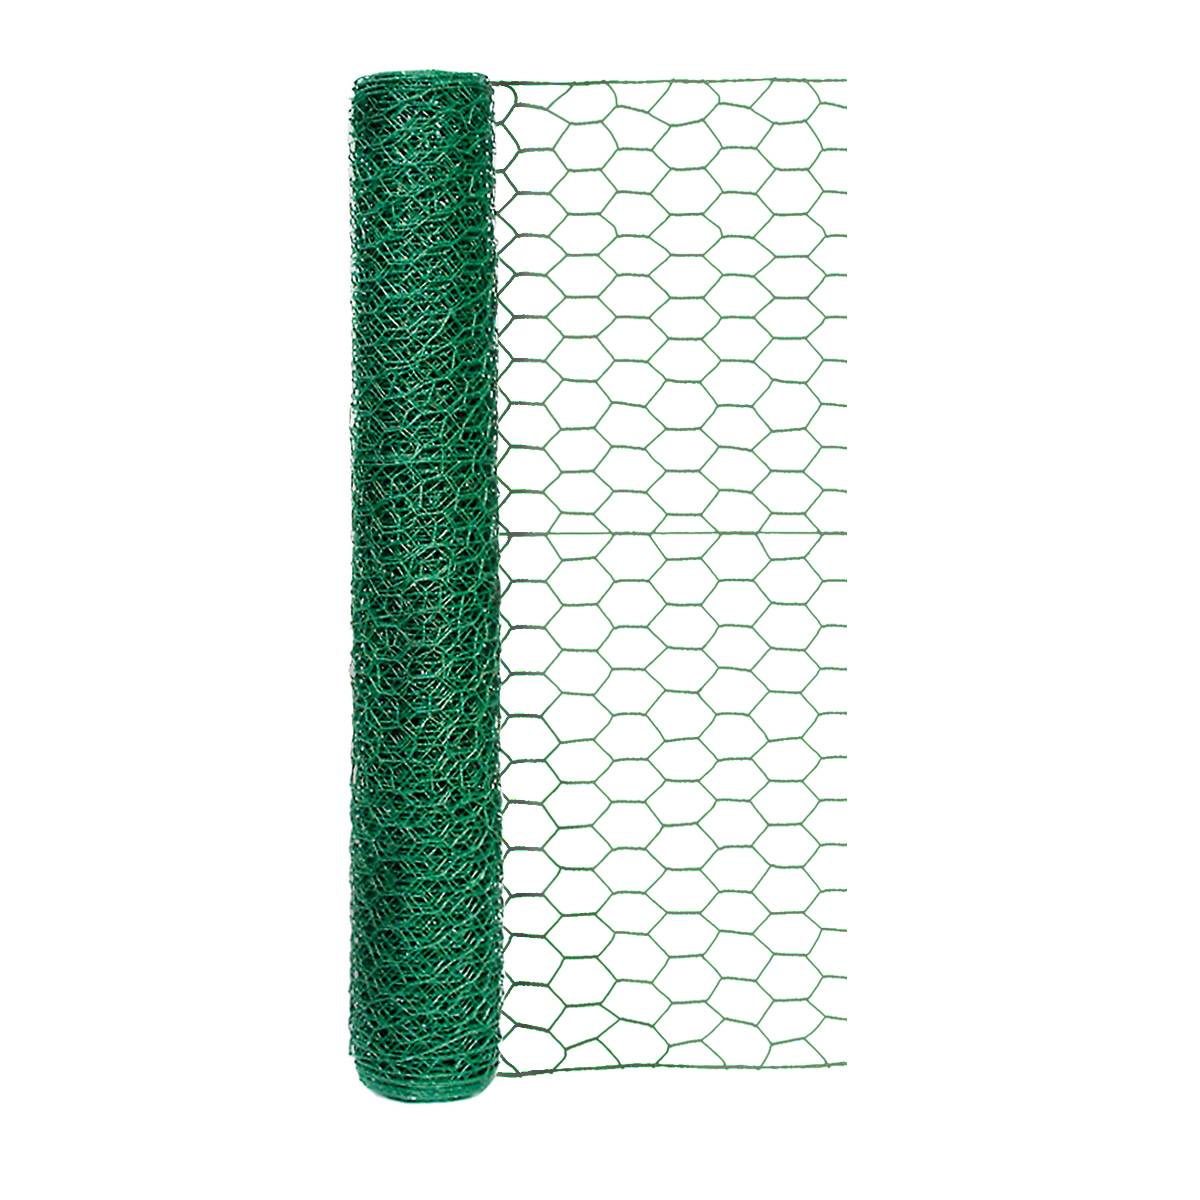 Pvc Coated Chicken Wire Mesh with Accessories